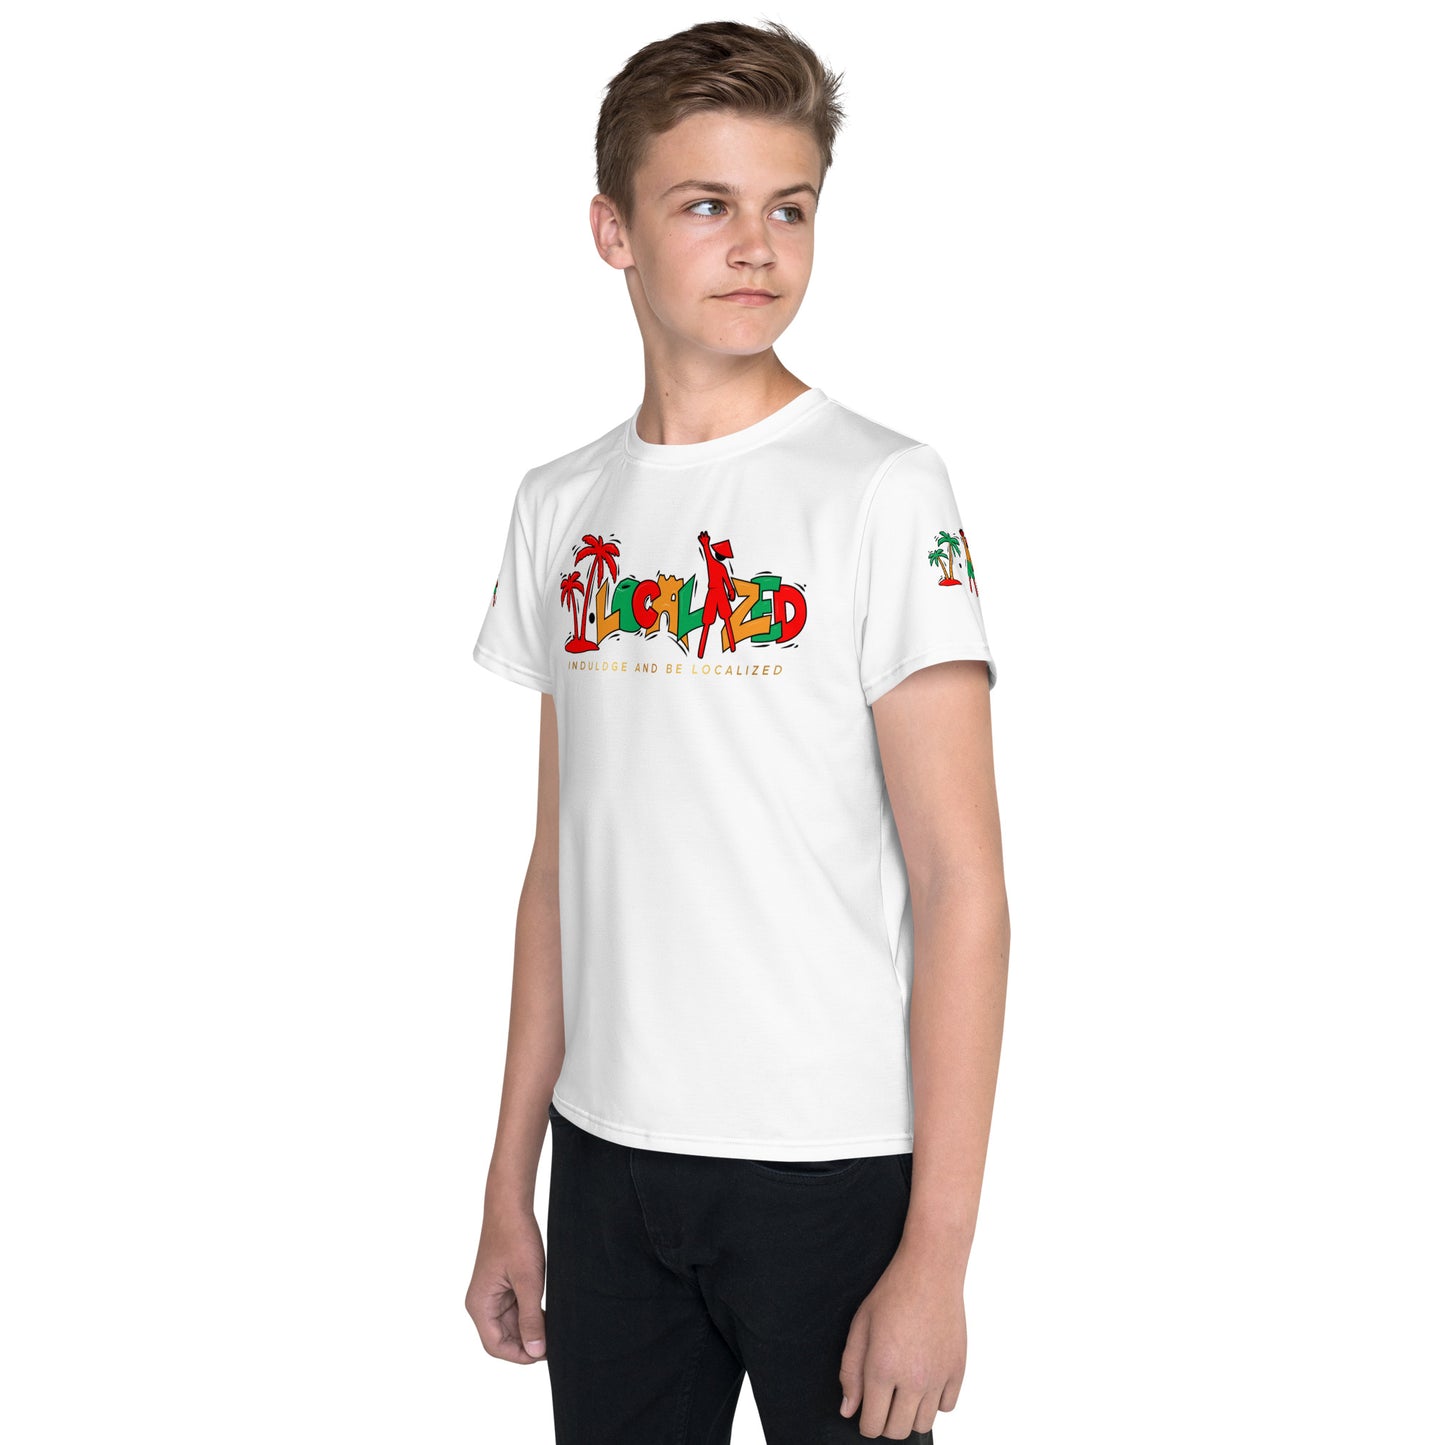 White V.Localized (Ice/Gold/Green) Youth Dry-Fit T-Shirt